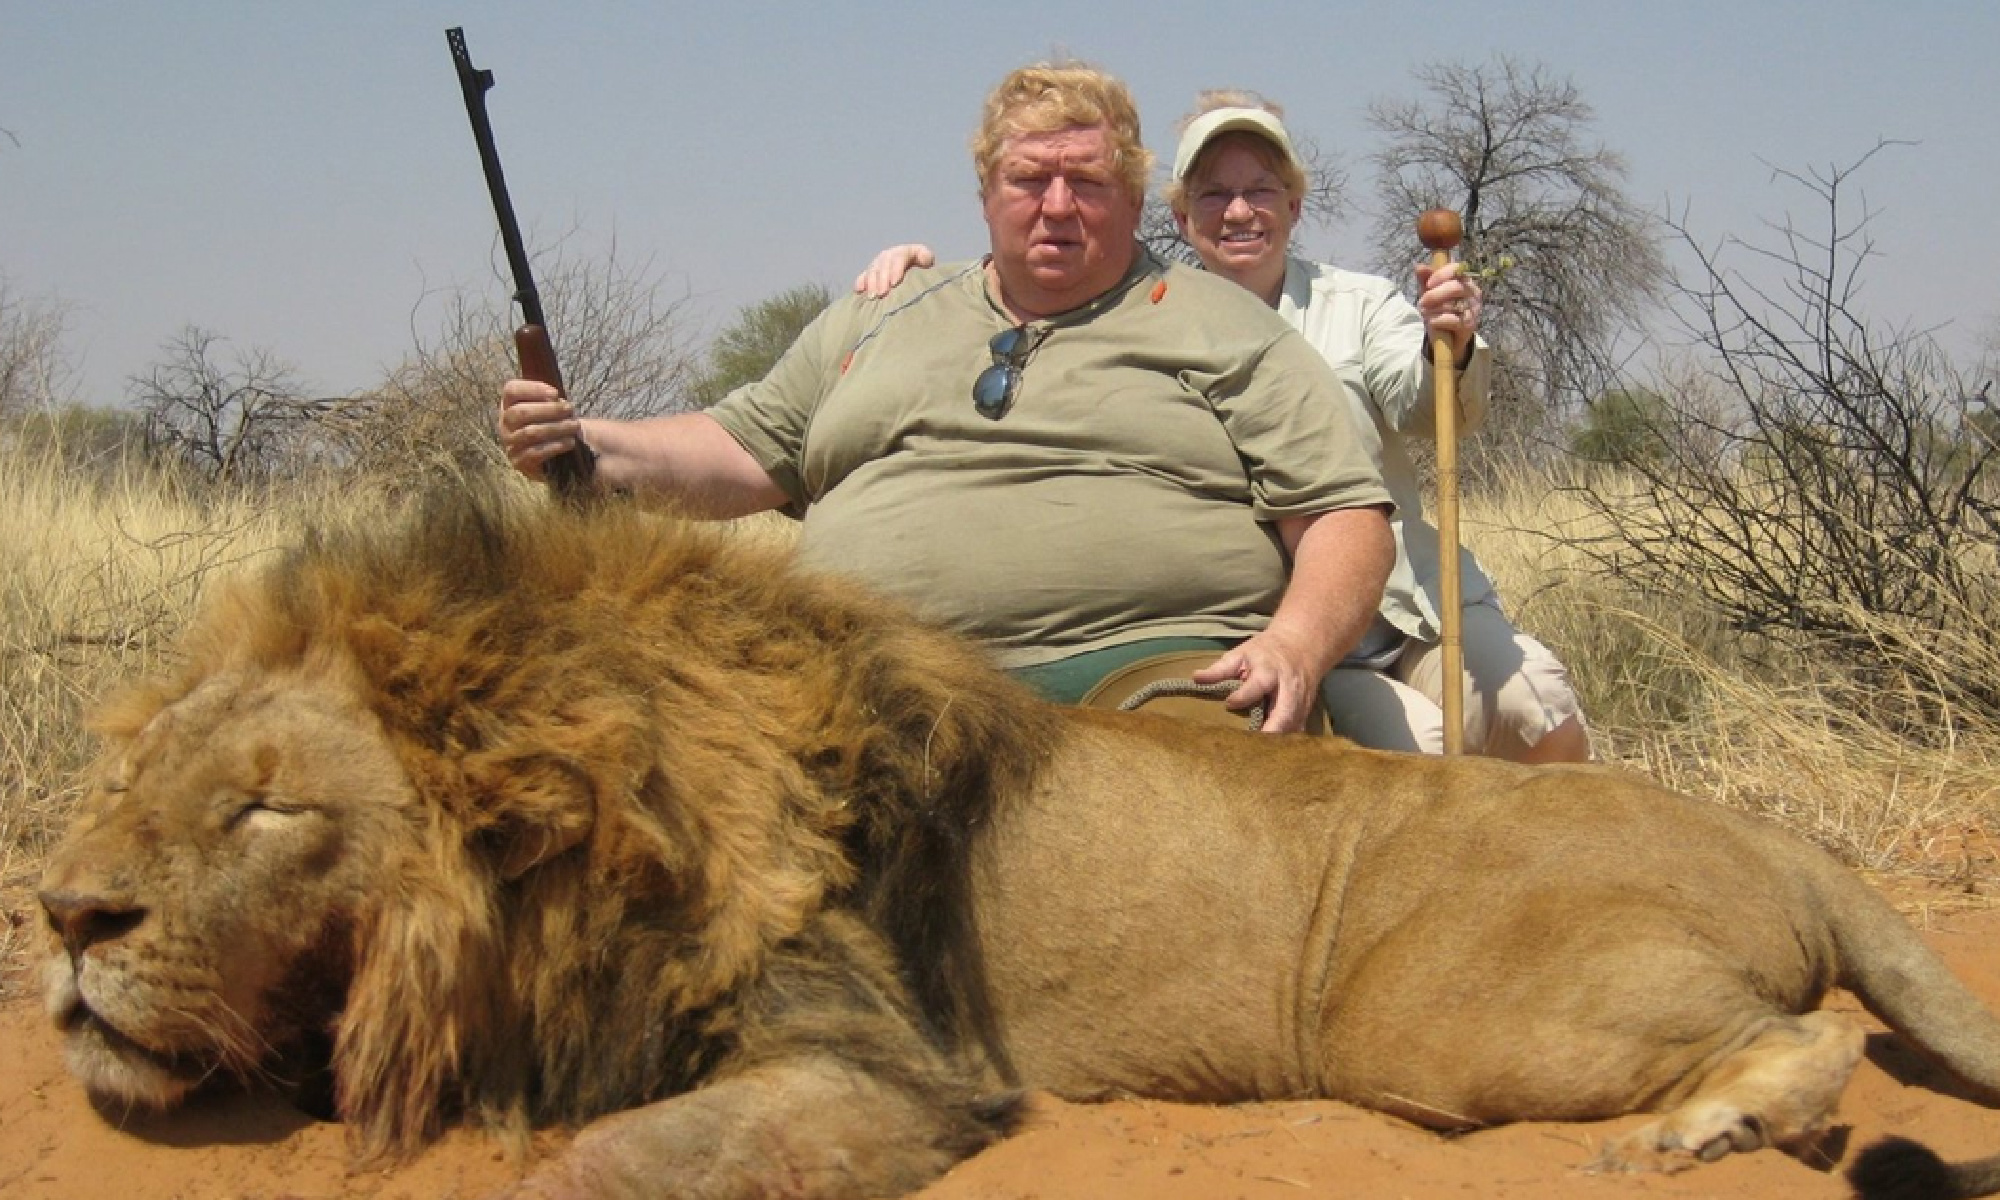 Viral Article on Hunter Eaten by Lions Is a Fraud. Here’s Where It Came From